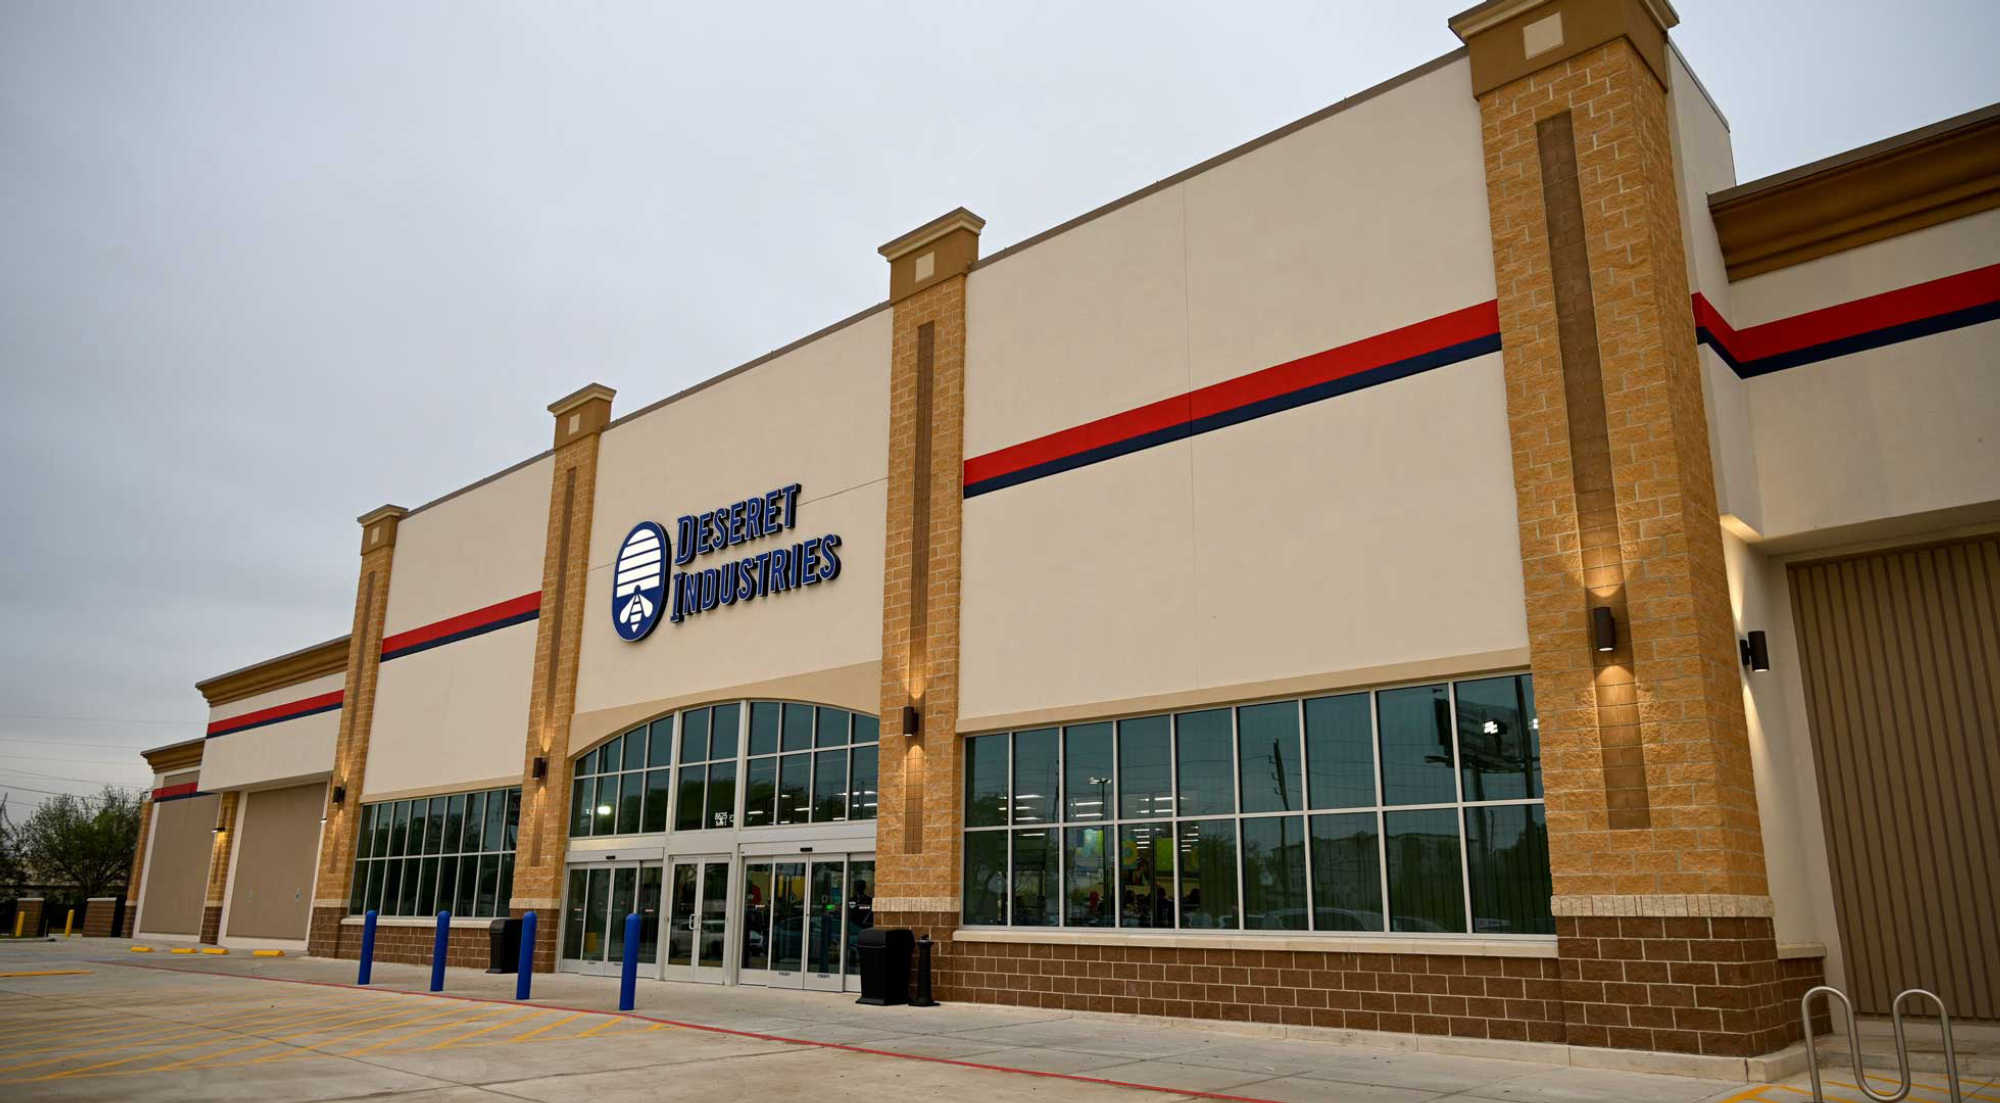 Exterior of the Houston Deseret Industries Thrift Store and Donation Center